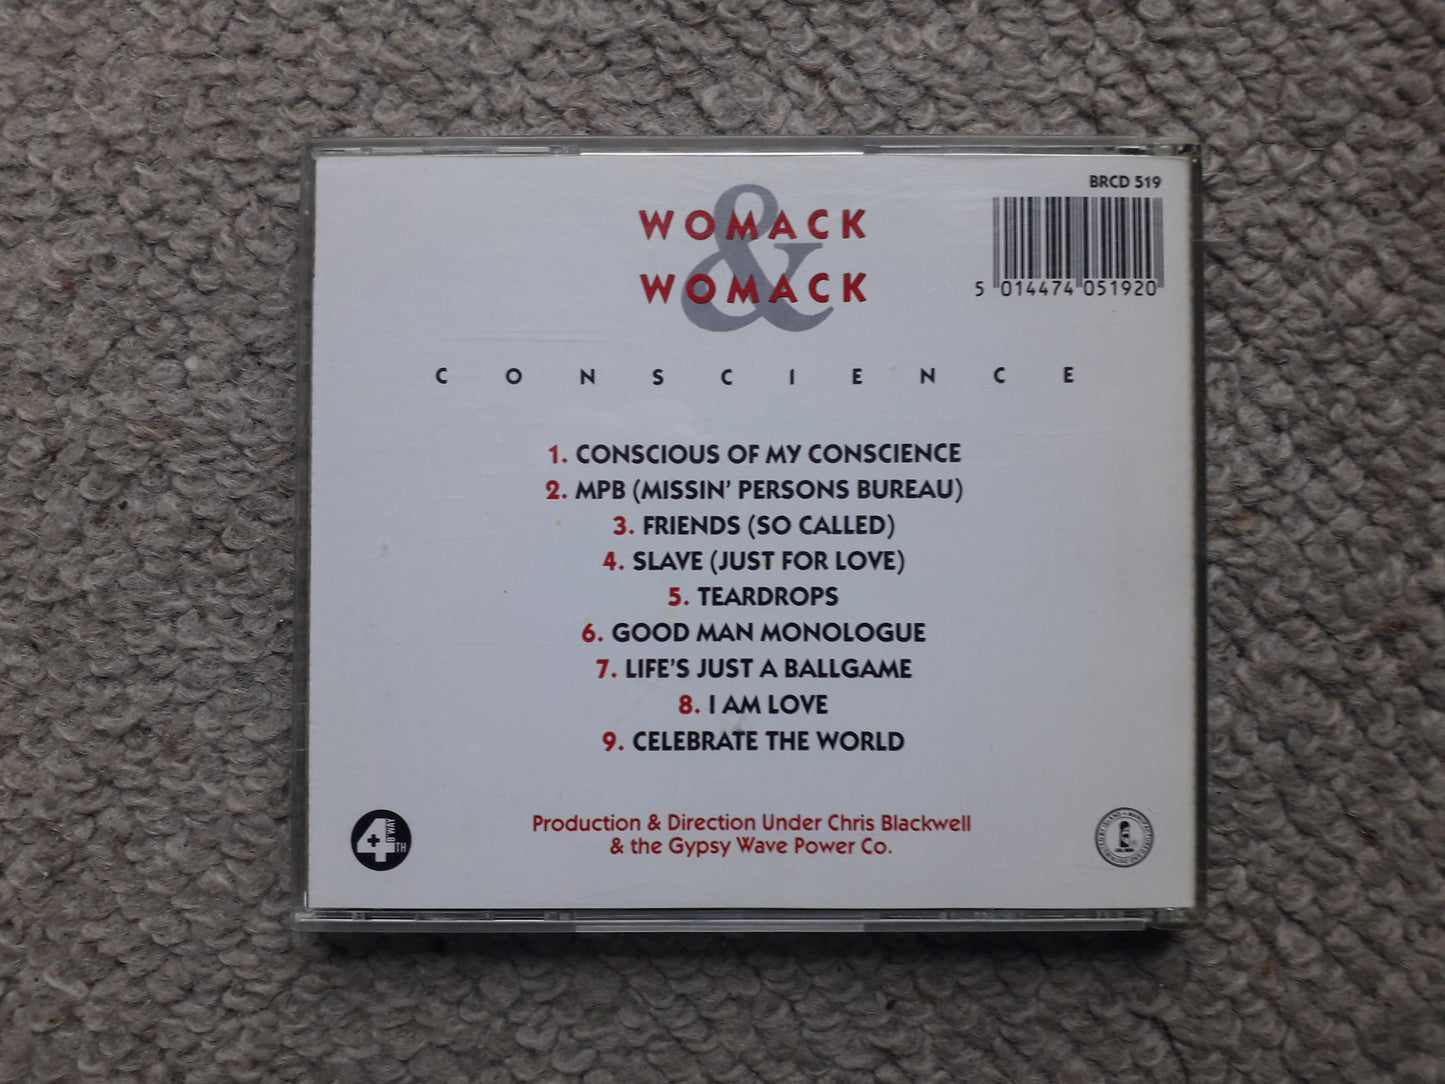 Womack & Womack-Conscience CD (BRCD 519)